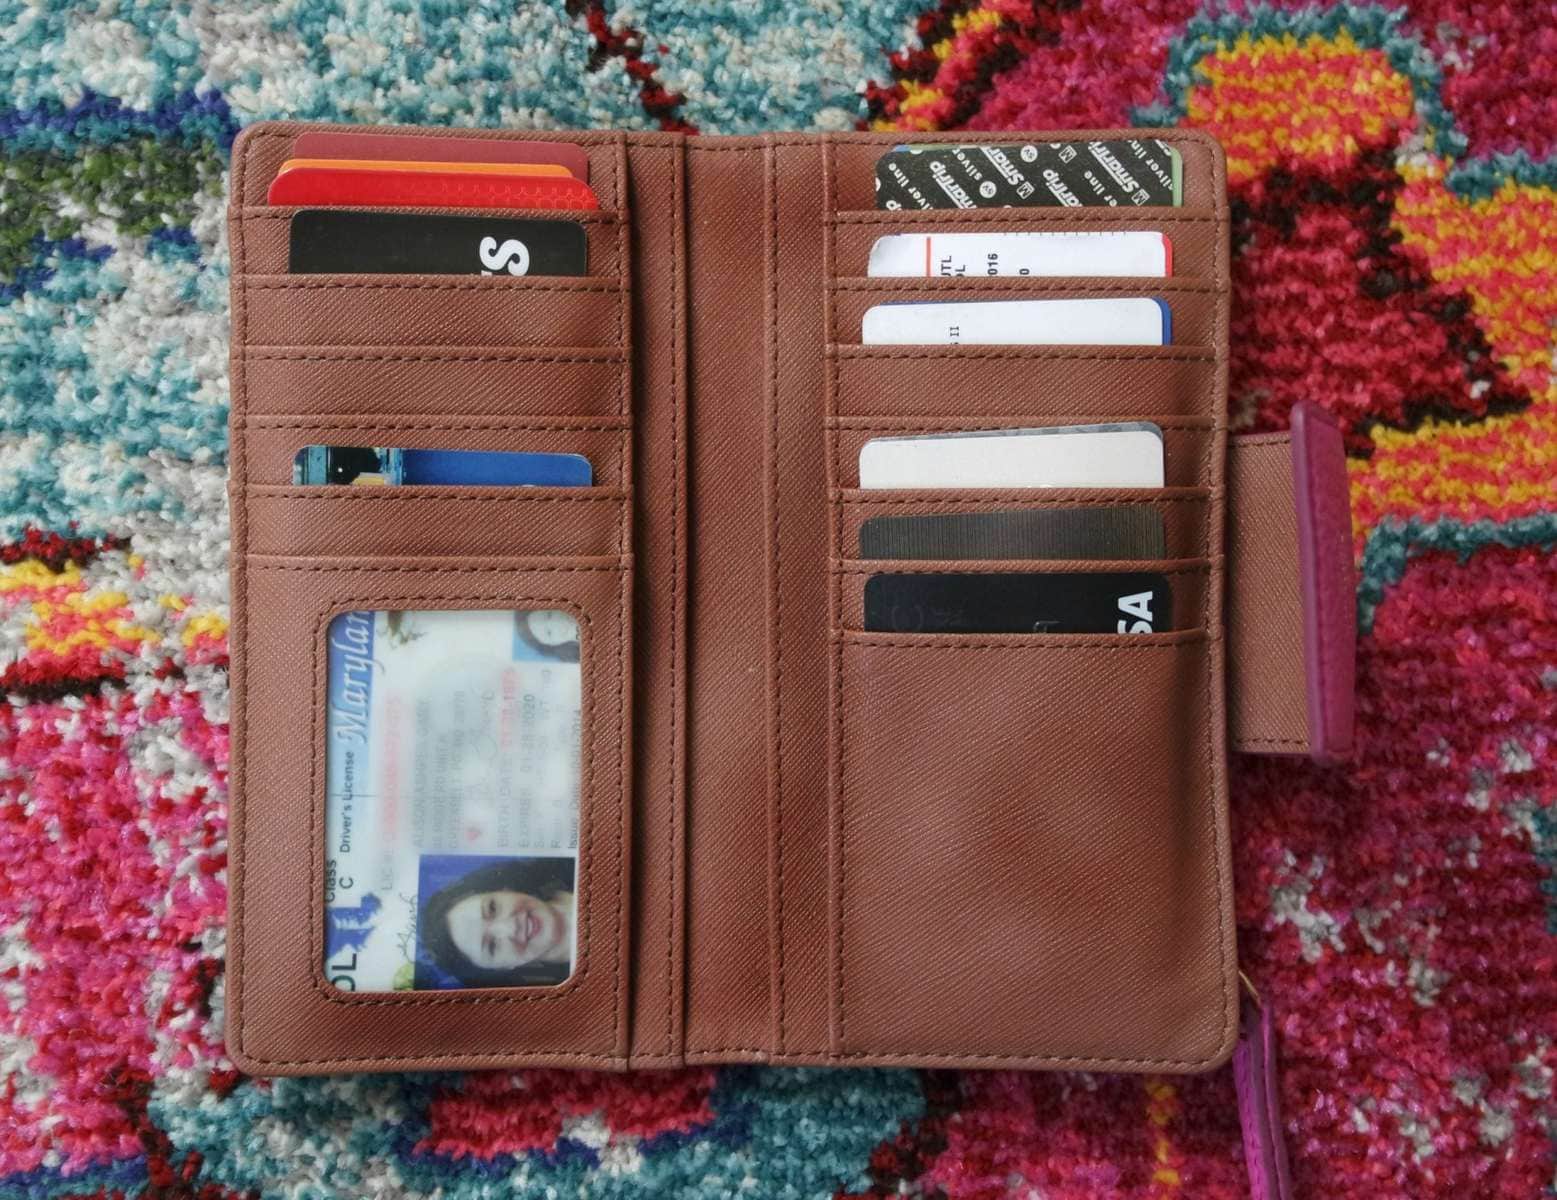 Fossil Sydney Wallet review